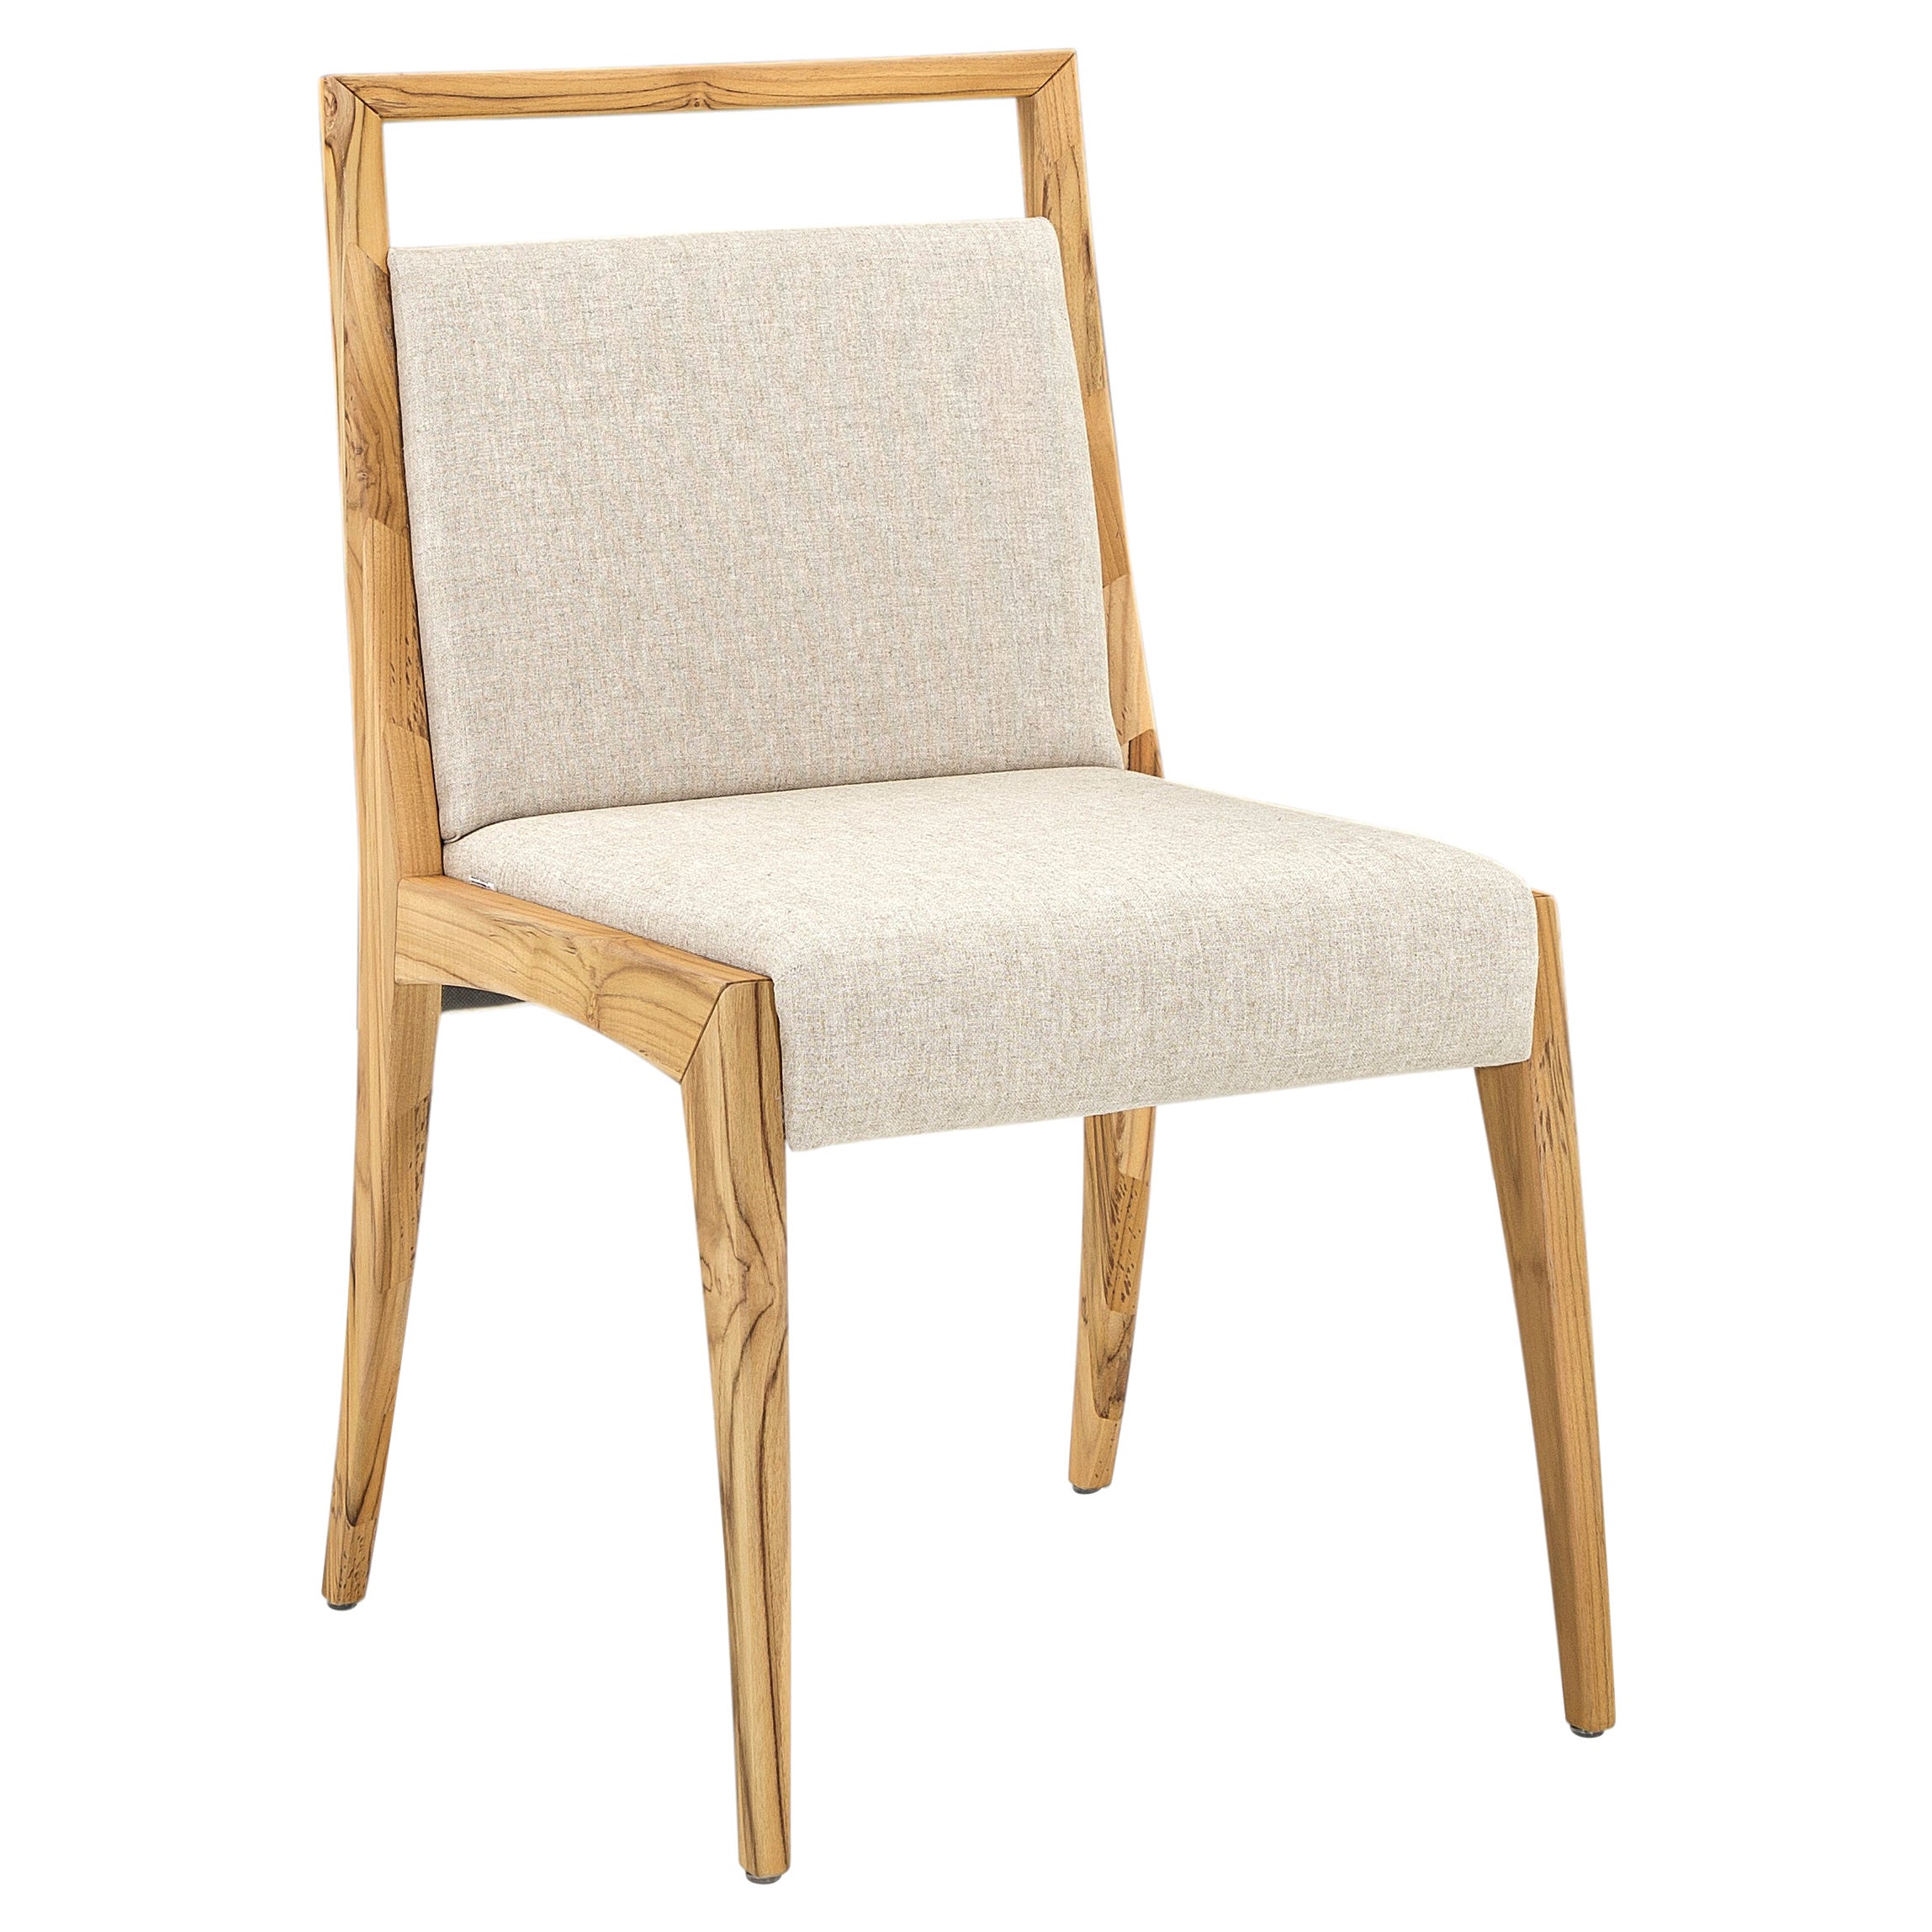 Putting a lot of effort our amazing Uultis team has created the Sotto dining chair, thinking of every possible detail like the open top rail in a teak wood finish that goes perfectly with the beige fabric. This pair of chairs are beautiful and